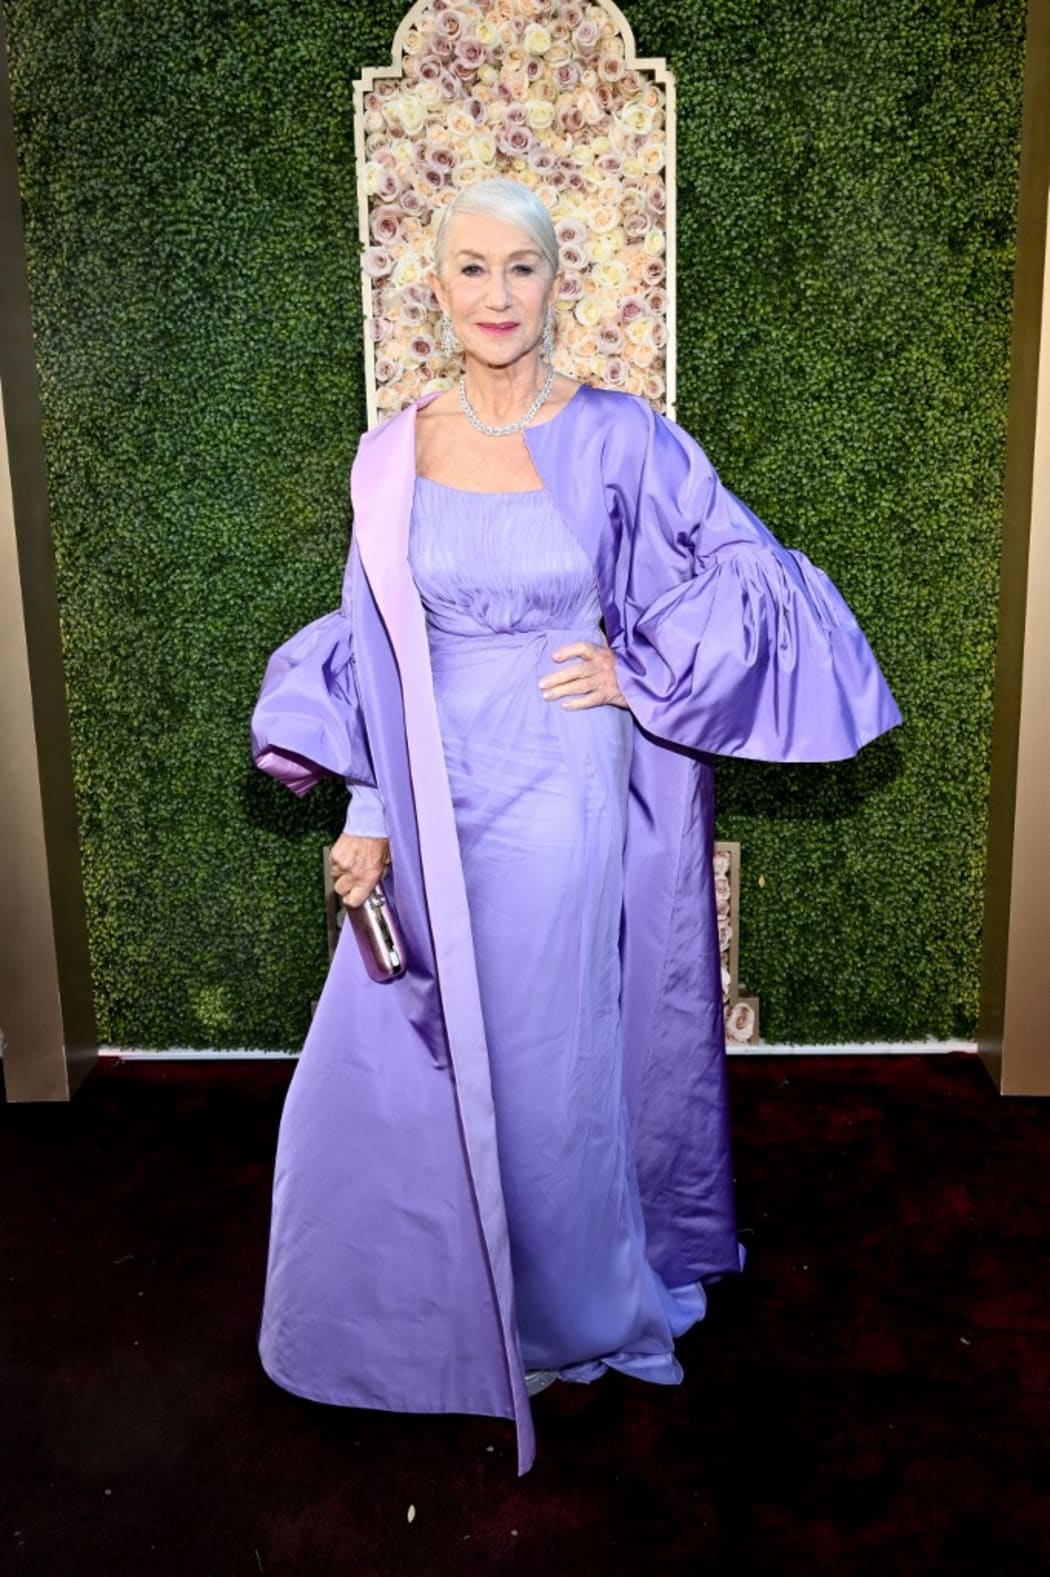 Helen Mirren at the 81st Golden Globe Awards held at the Beverly Hilton Hotel on January 7, 2024 in Beverly Hills, California.